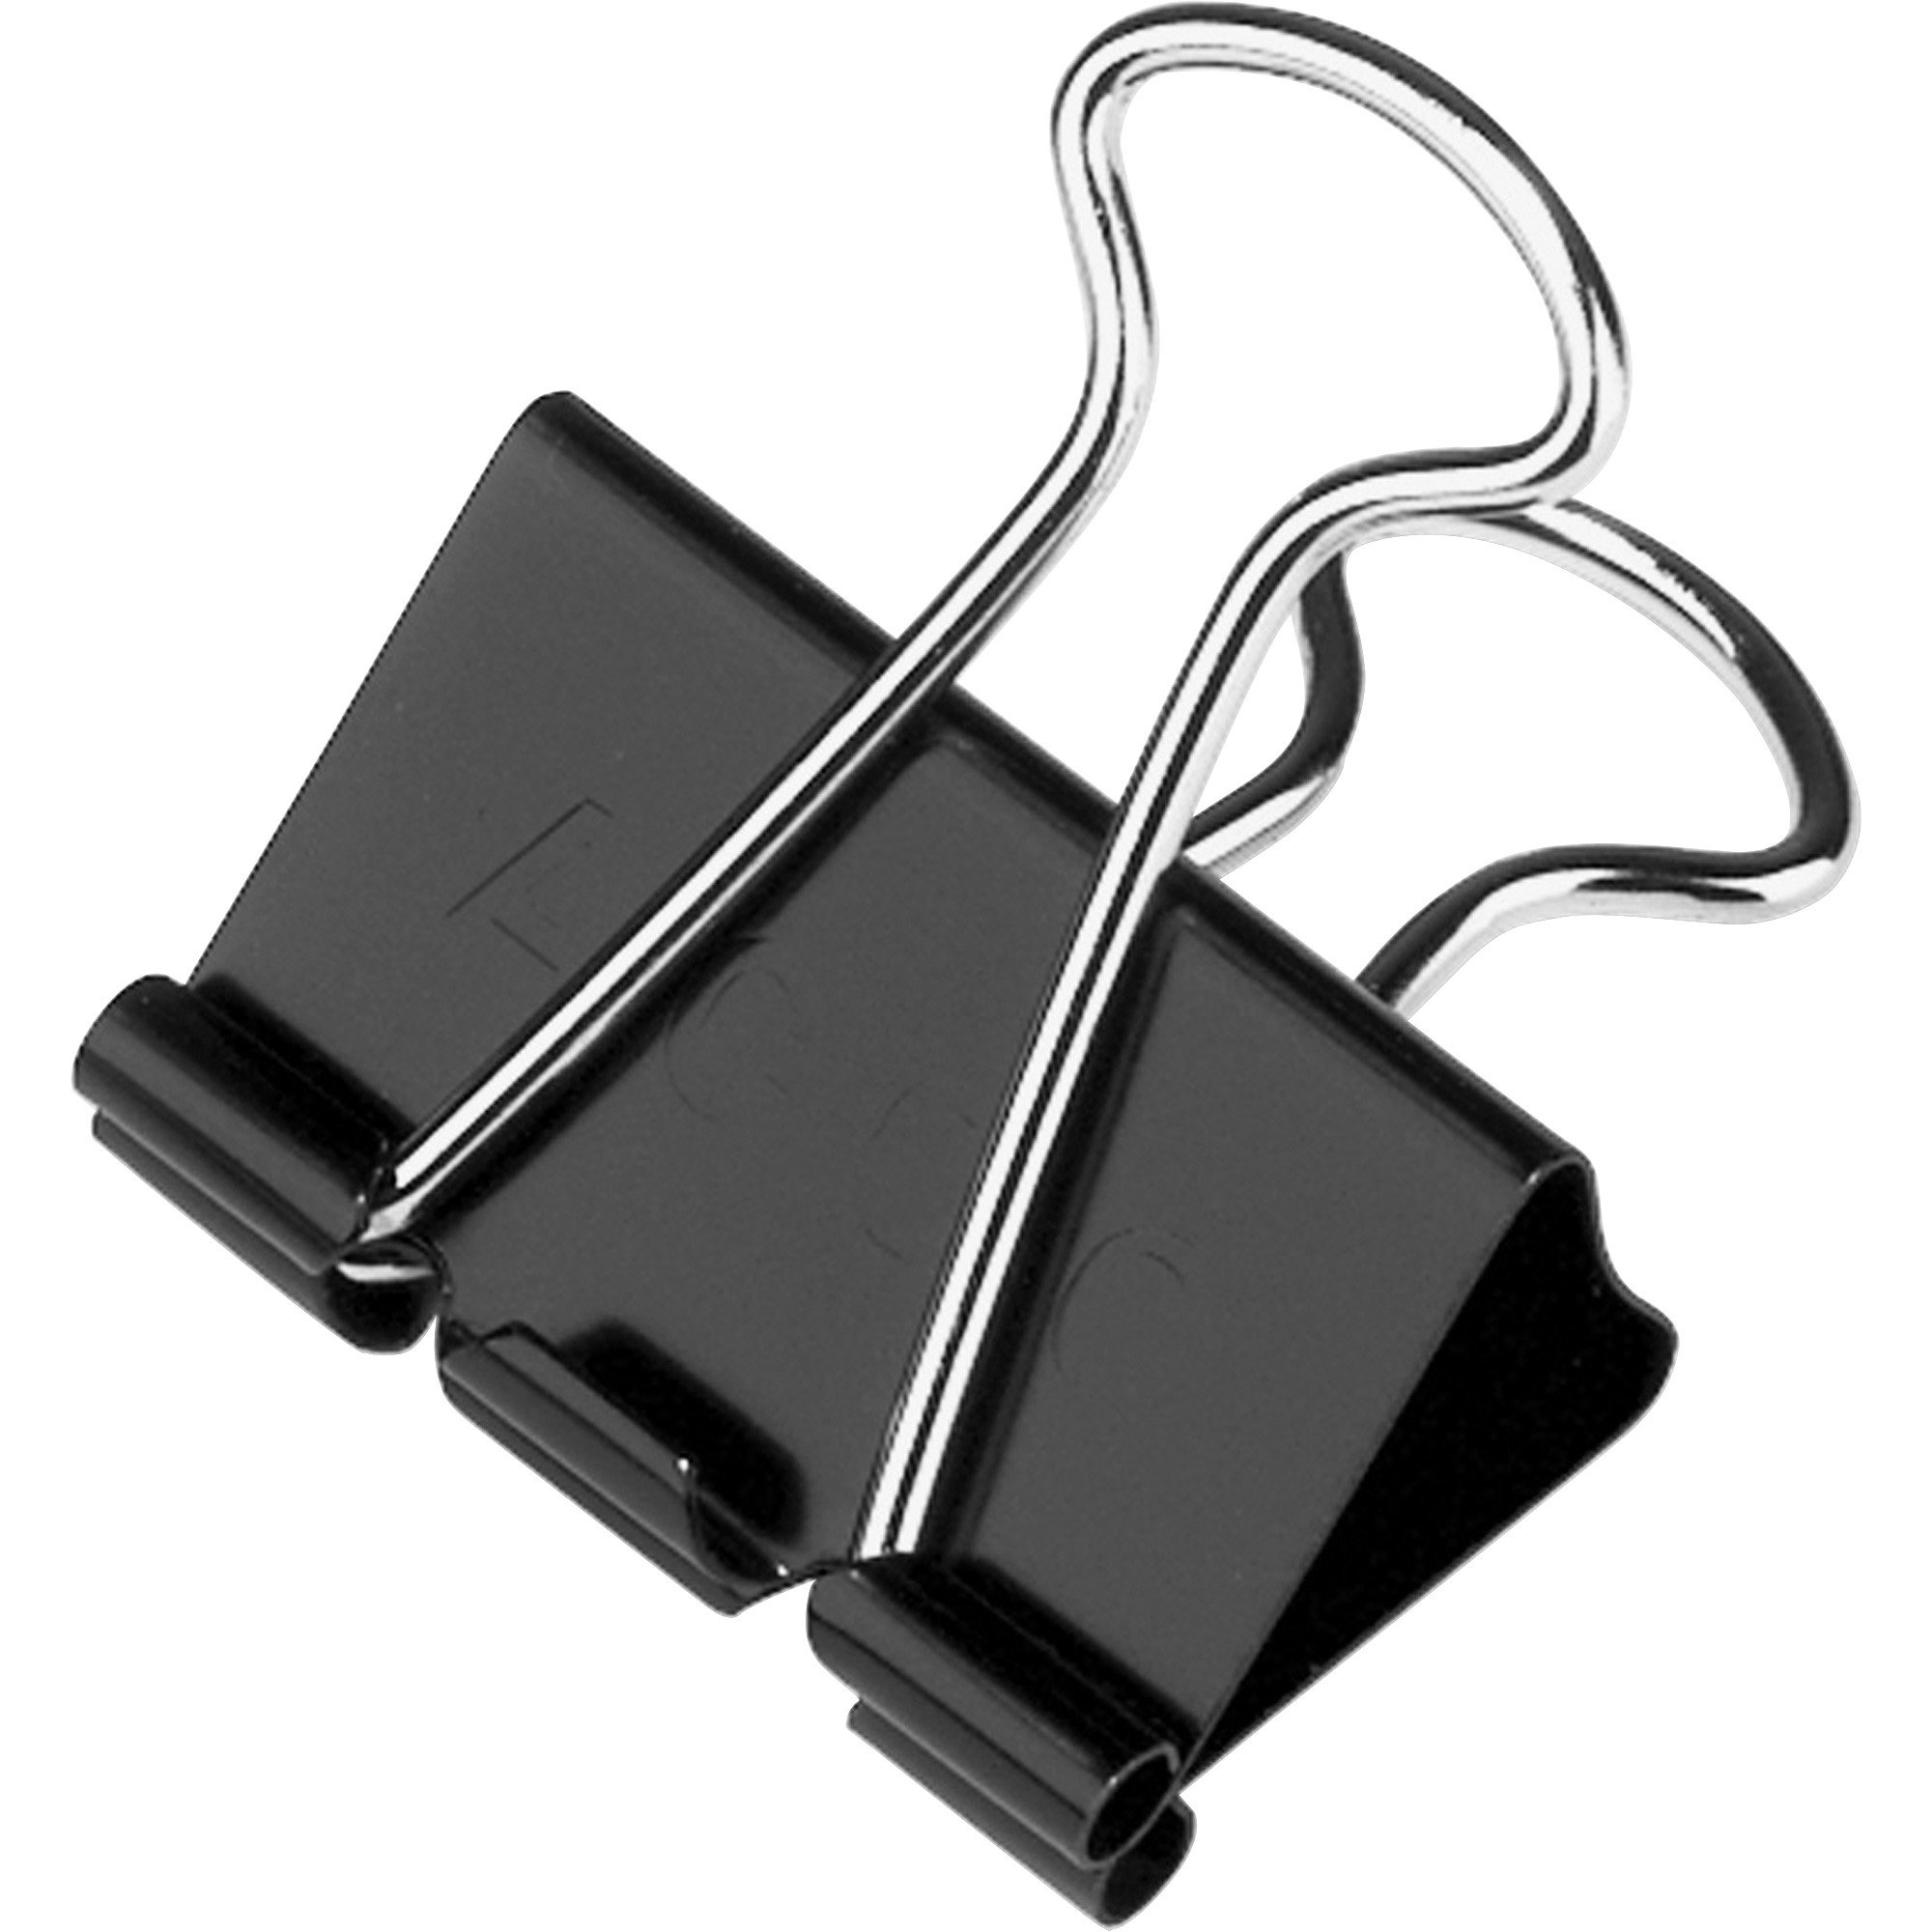 A black and silver binder clip